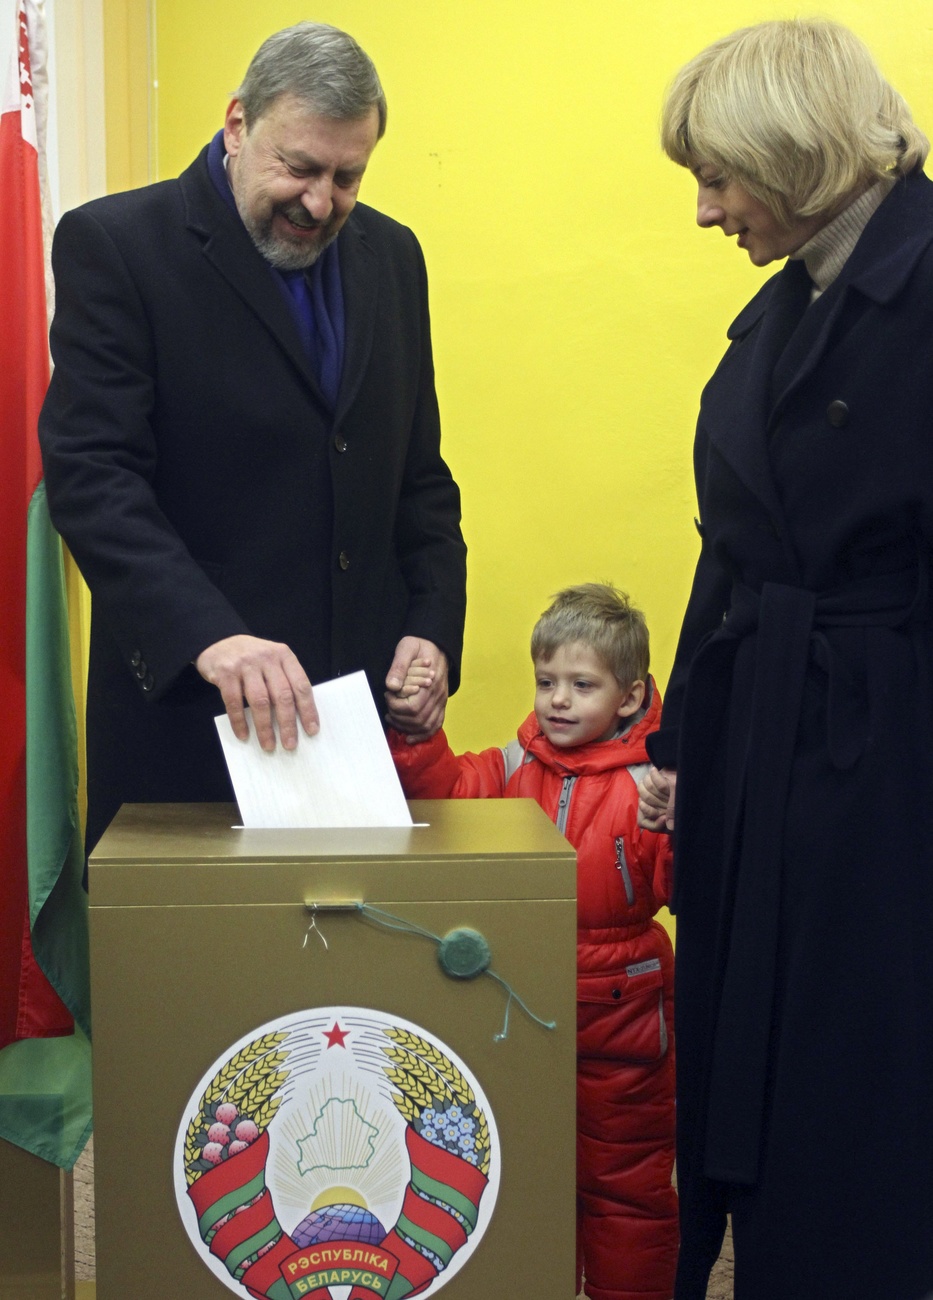 Sannikov, with wife and son, voting